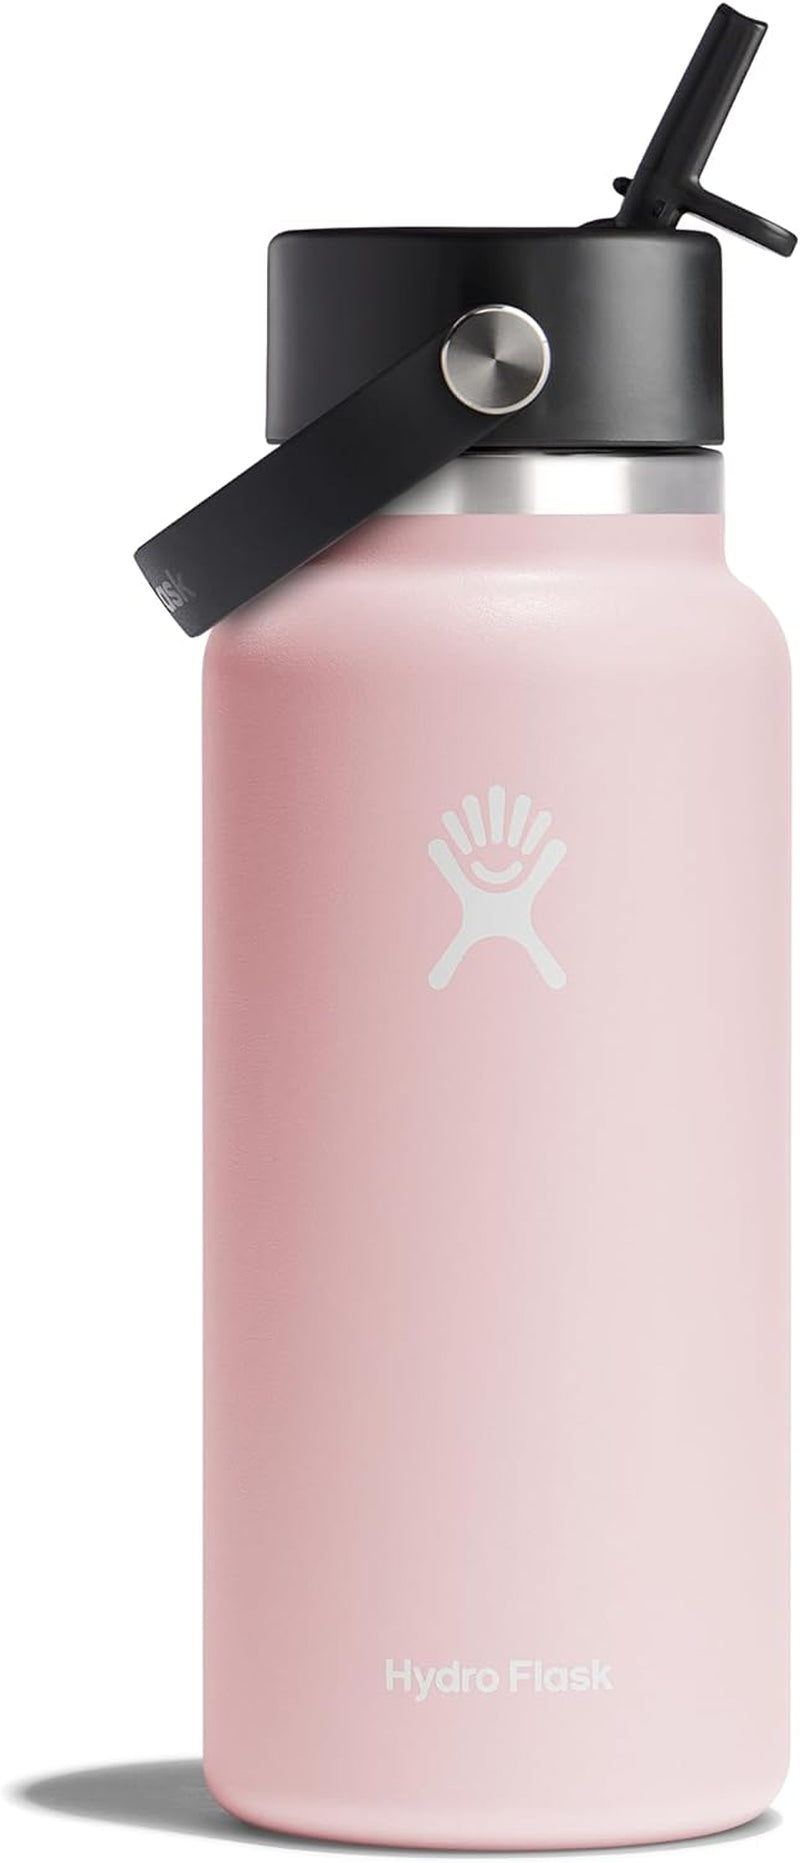 Wide Mouth Vacuum Insulated Stainless Steel Water Bottle with Leakproof Closeable Straw Lid for Cold Water Drinks, Sports, Travel, Car and School